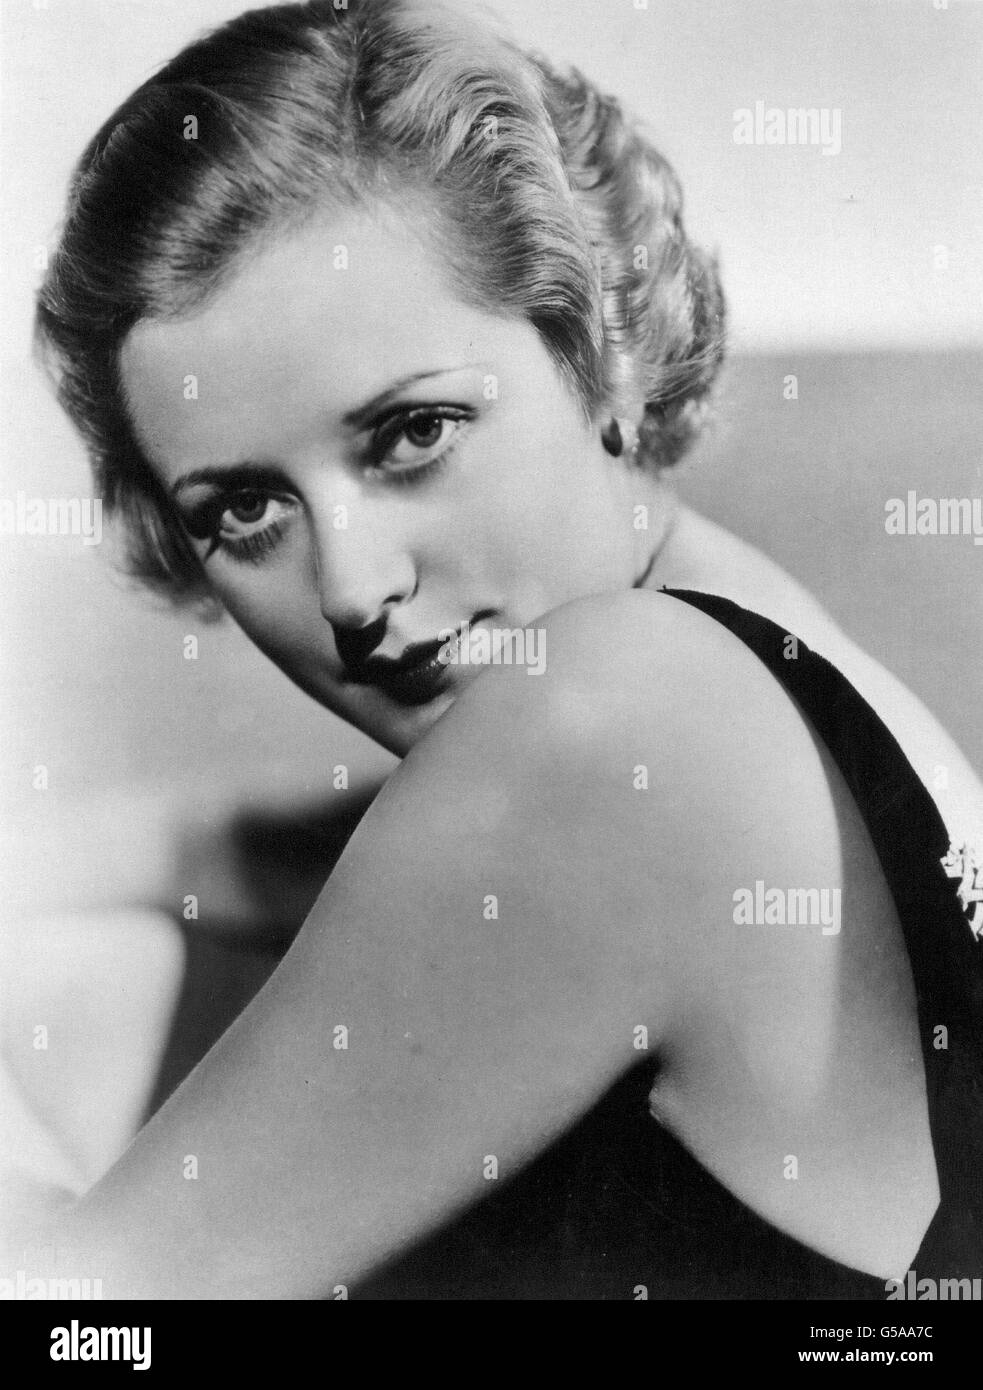 Evelyn Laye - 1936. Teatro e film musicale attrice Evelyn Laye. Foto Stock